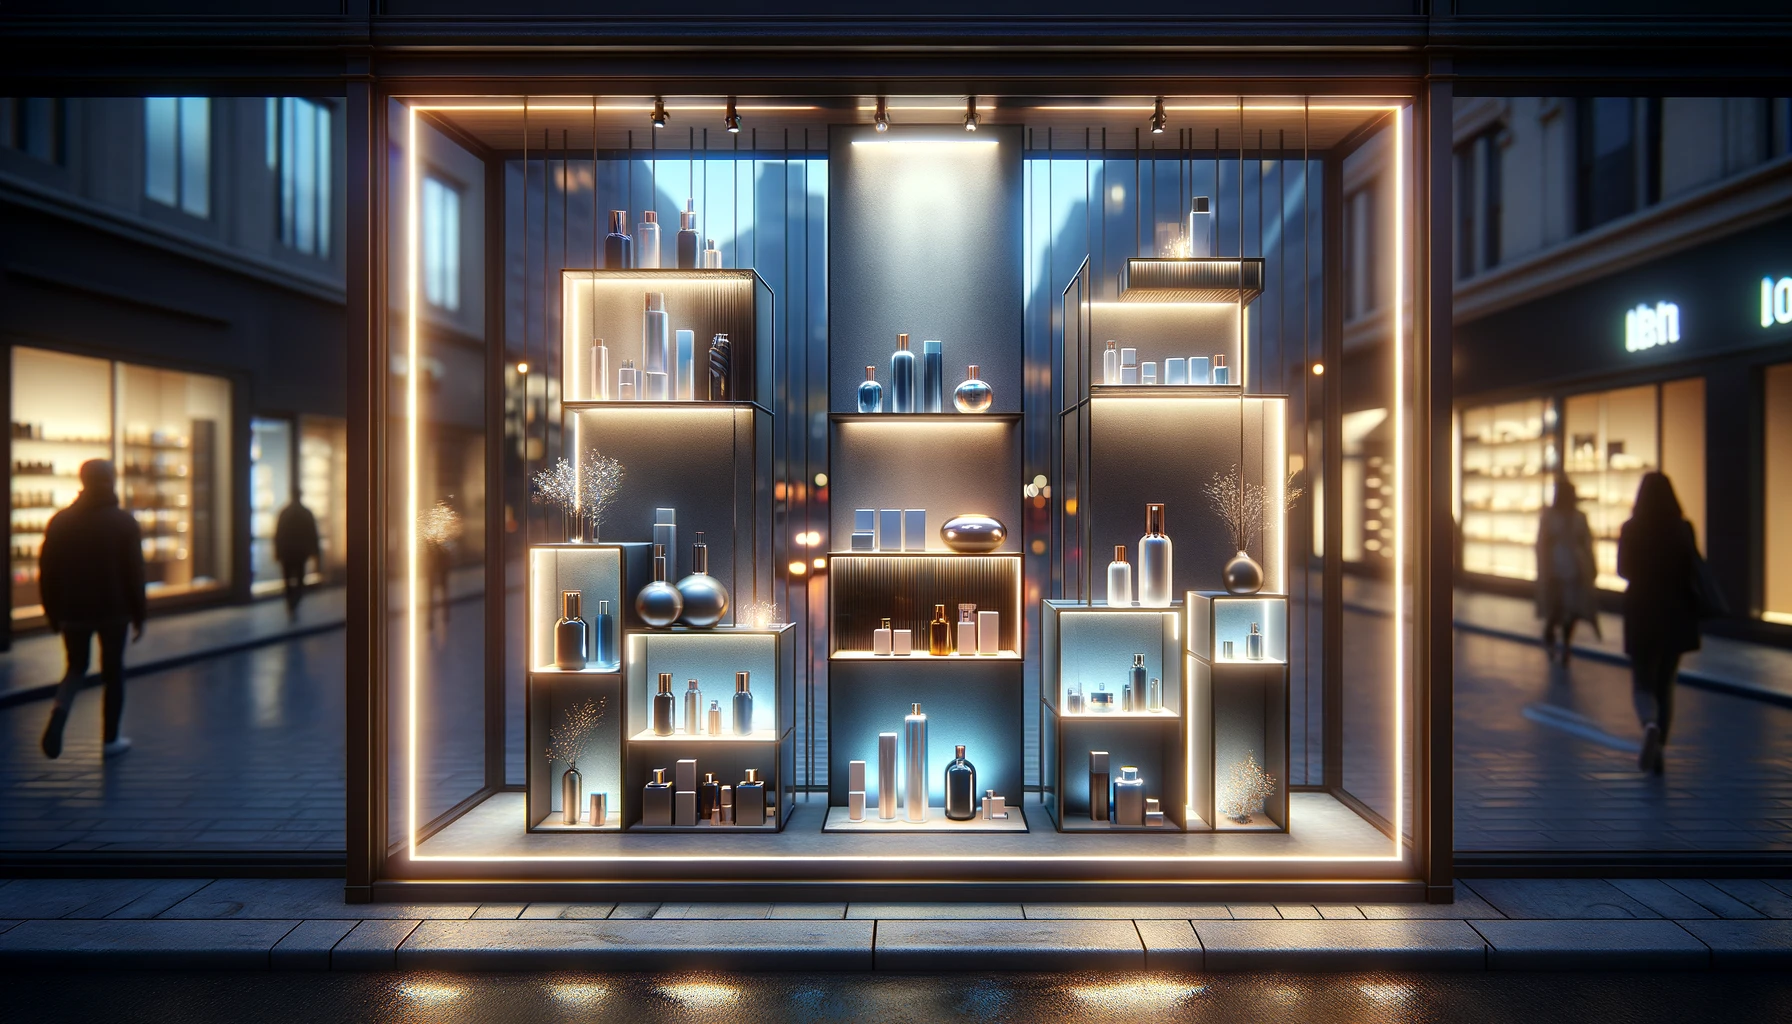 A captivating window display design at dusk, featuring an array of contemporary products elegantly arranged on glass shelves. LED lights, embedded within the shelves, illuminate the display, creating a mesmerizing visual merchandising effect. These lights, transitioning in color from warm amber to cool blue, highlight the products and their details, drawing attention with their atmospheric glow. The urban backdrop, slightly blurred, focuses on the illuminated display, enhanced by city lights reflections, showcasing effective visual merchandising techniques.